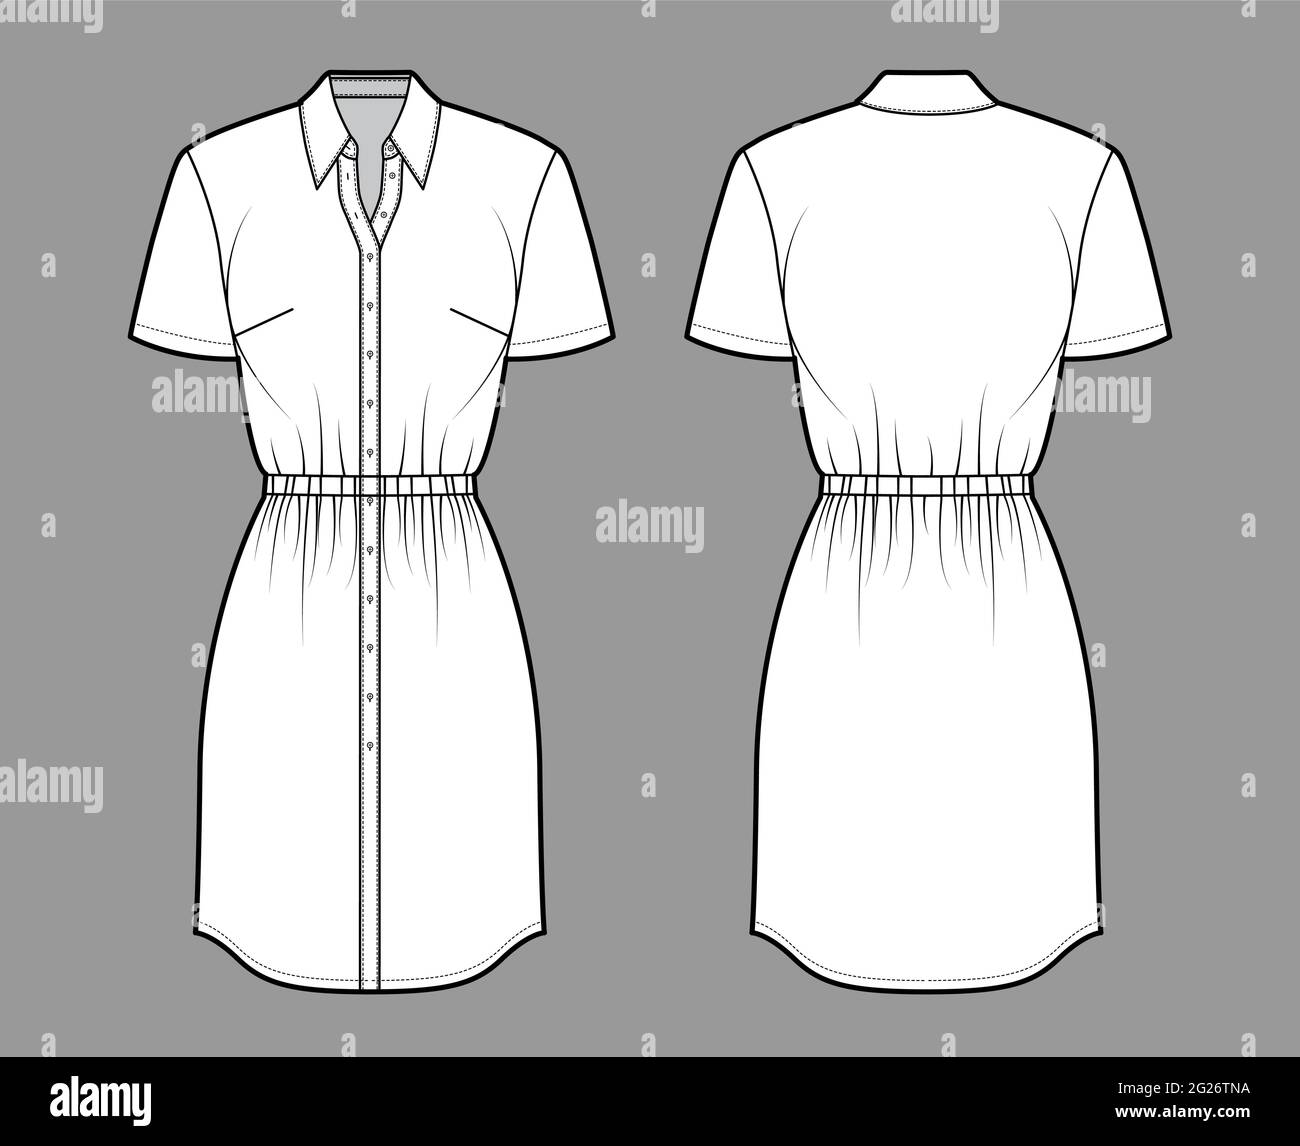 Dress shirt technical fashion illustration with gathered waist, short sleeves,, knee length pencil skirt, classic collar, button closure. Flat apparel front, back, white color. Women, men CAD mockup Stock Vector